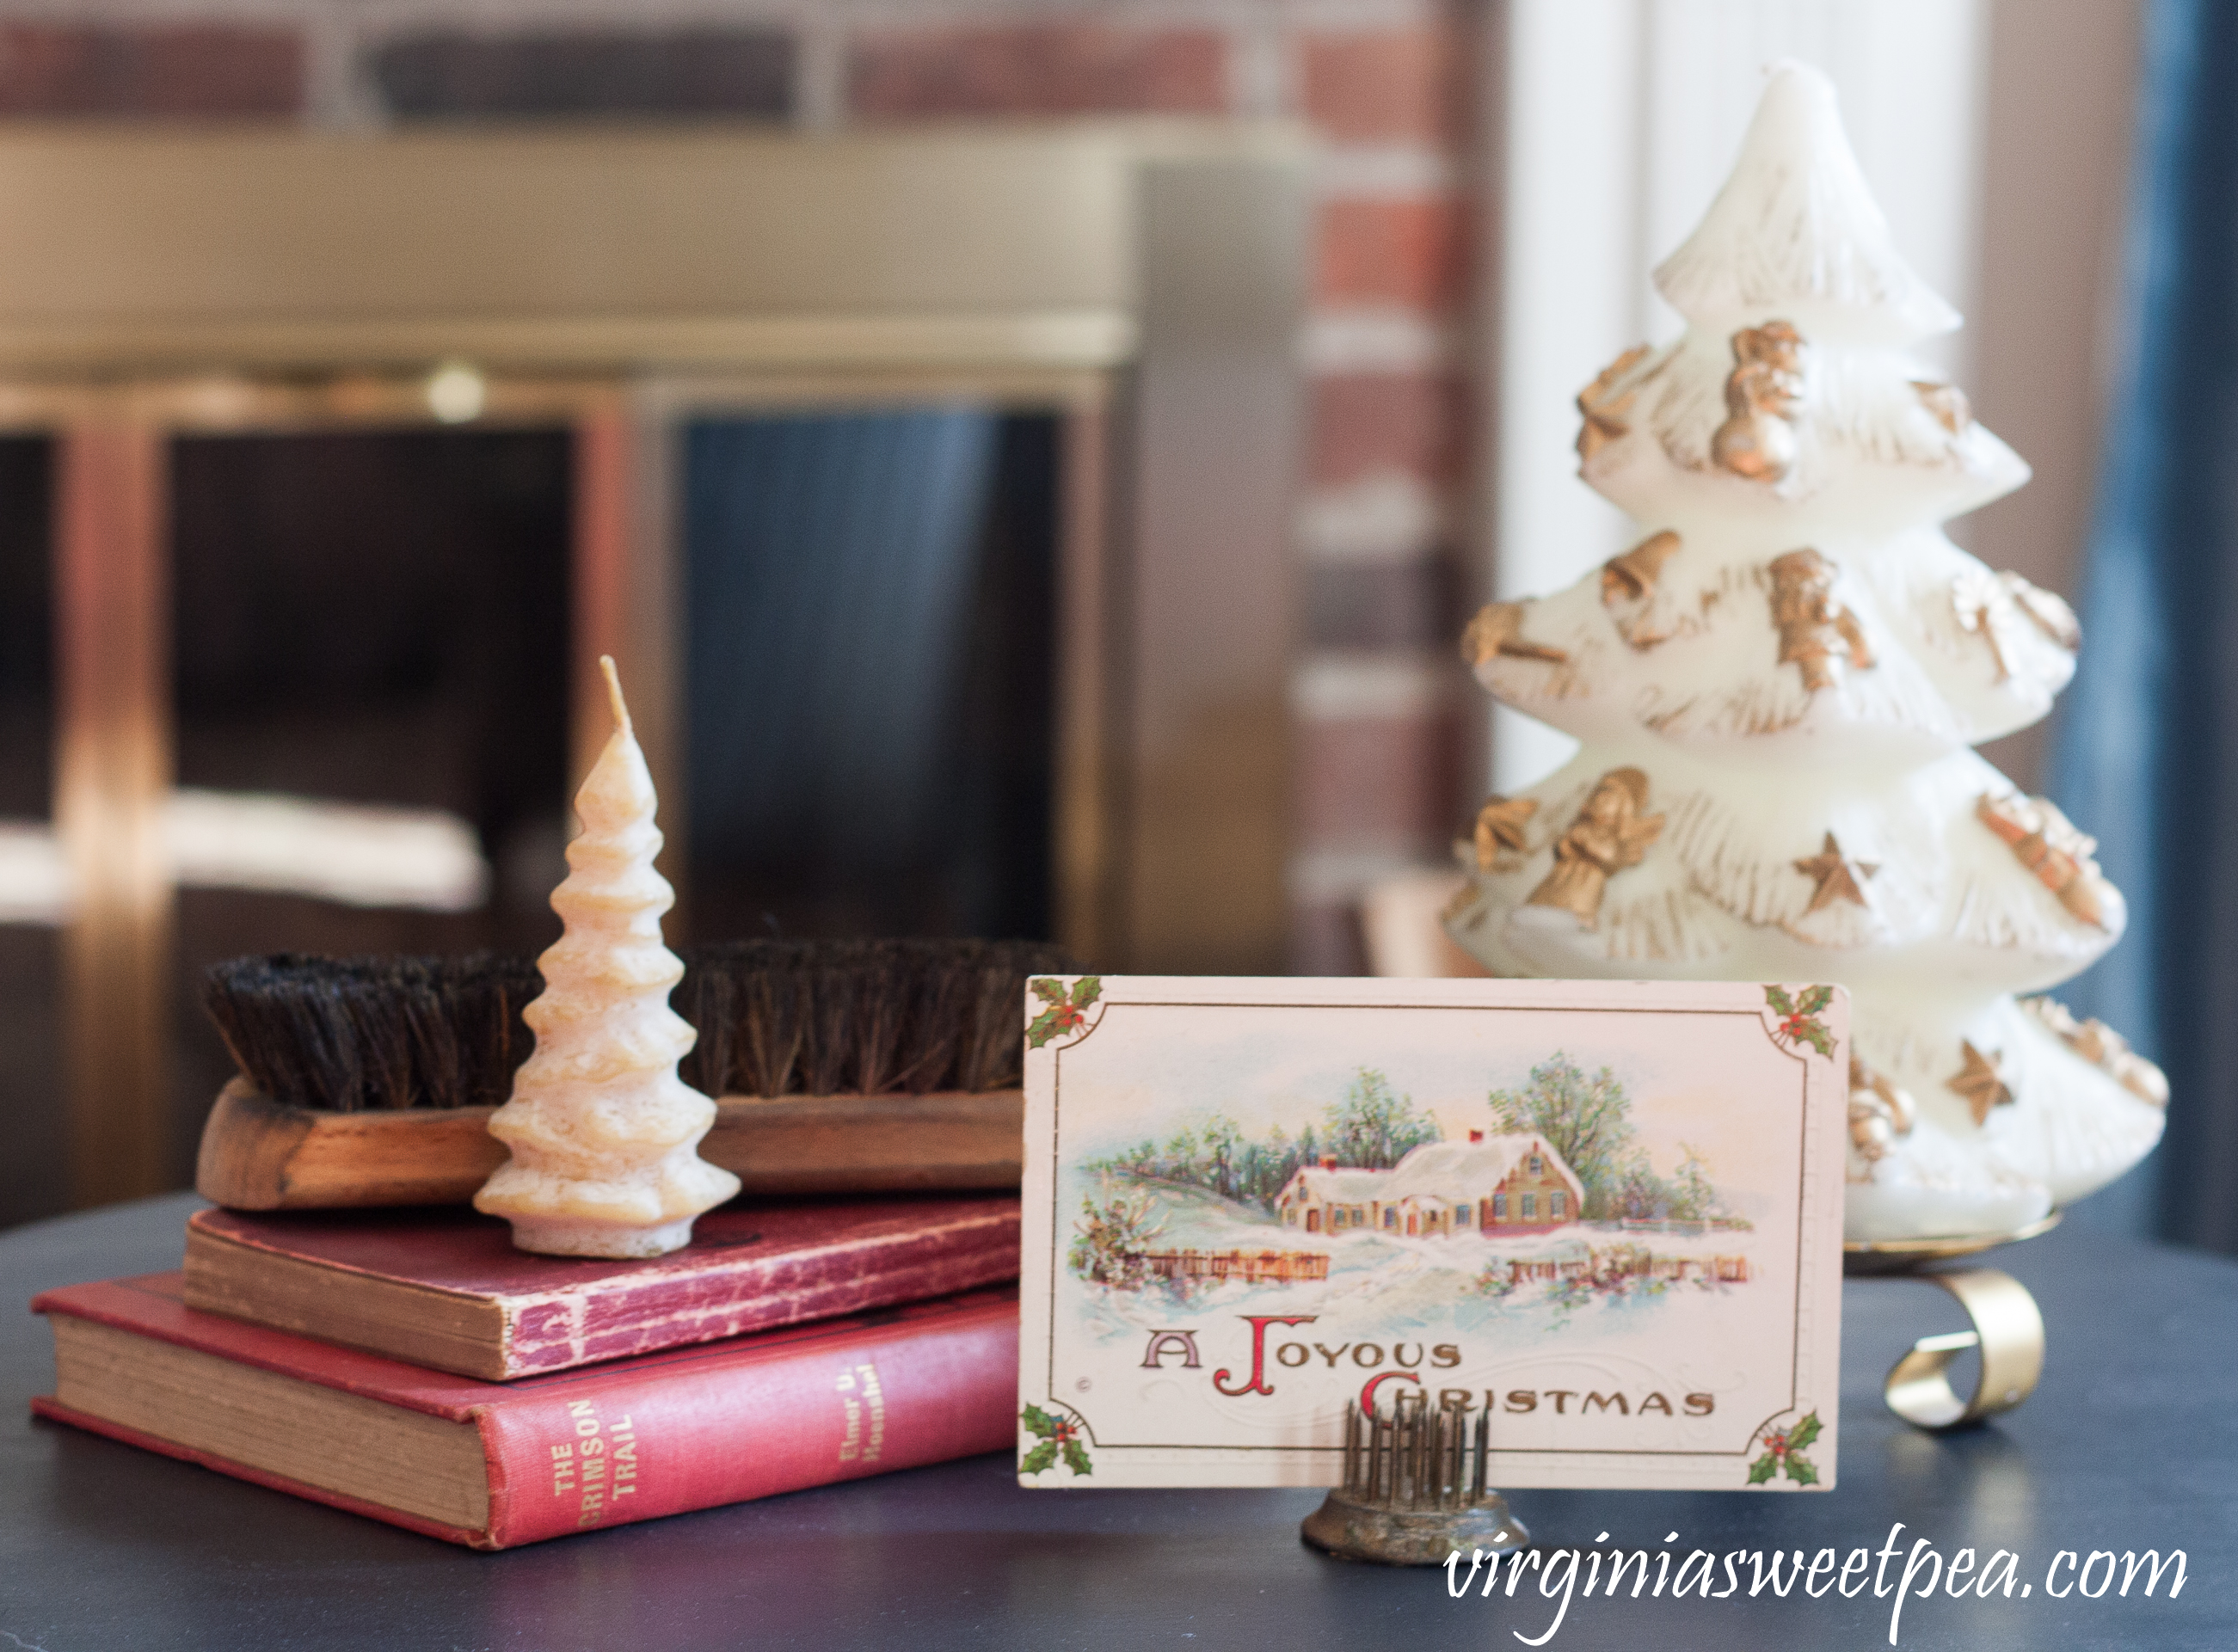 Vintage Christmas Vignette from a home that decorates for the season using mostly vintage and antiques. #christmas #christmasdecor #vintagechristmas